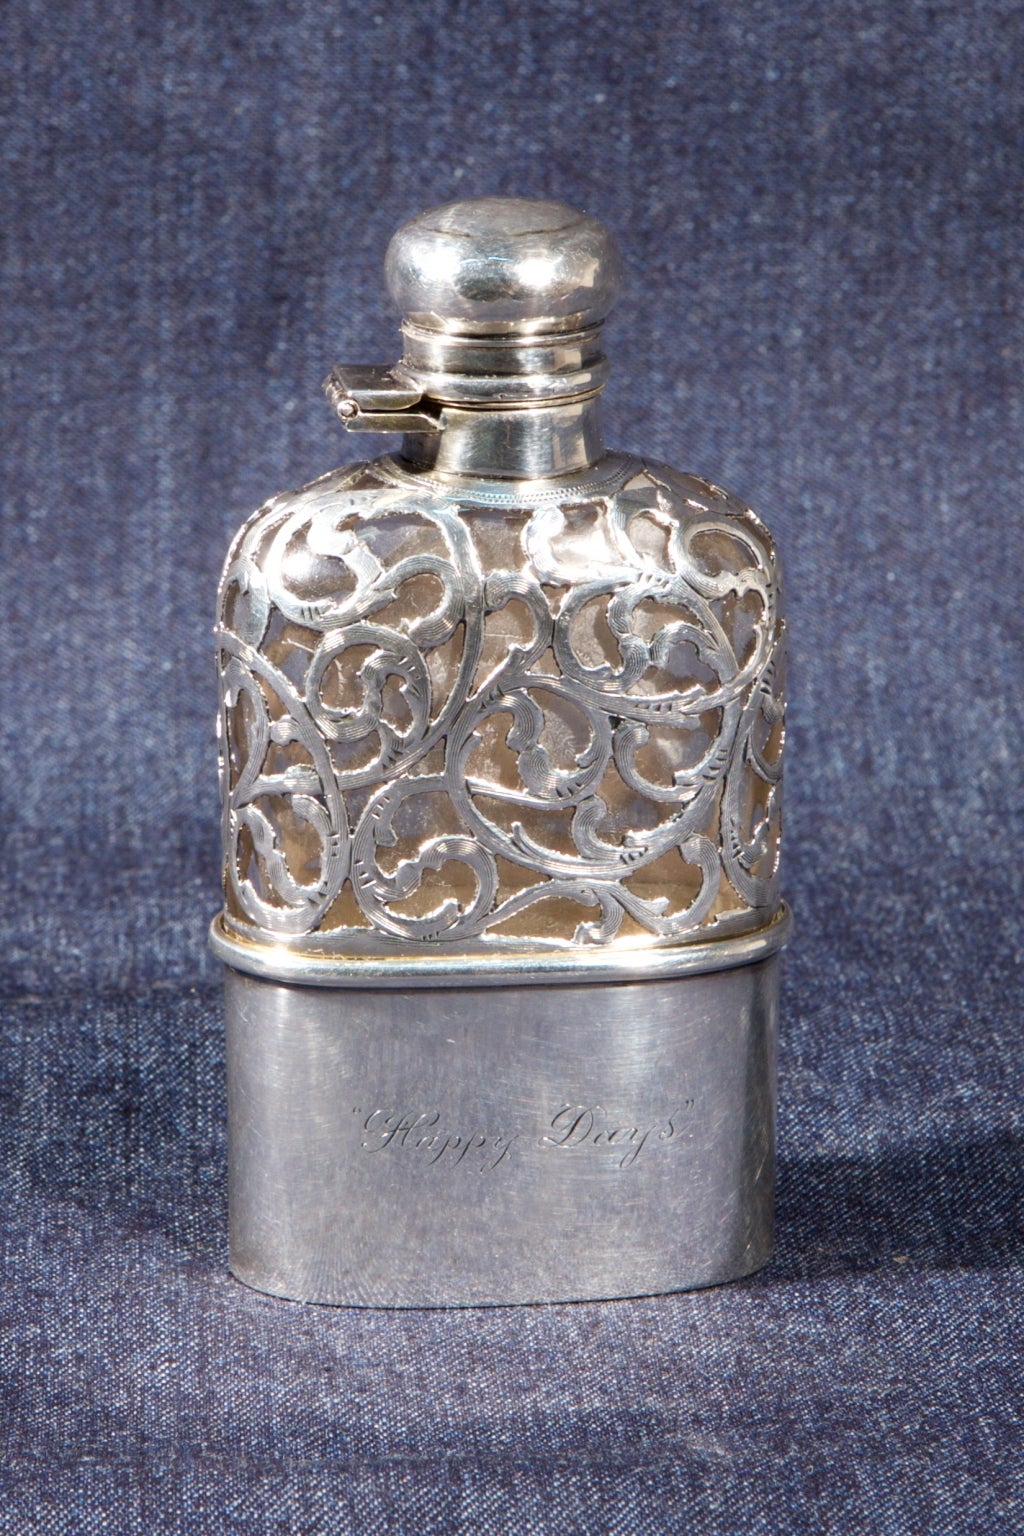 American (or English ?) pocket flask of whiskey in silver sterling and glass, with initials -
Punched J.B. Caldwell & Co - An idea for a beautiful gift.
.A/2477.